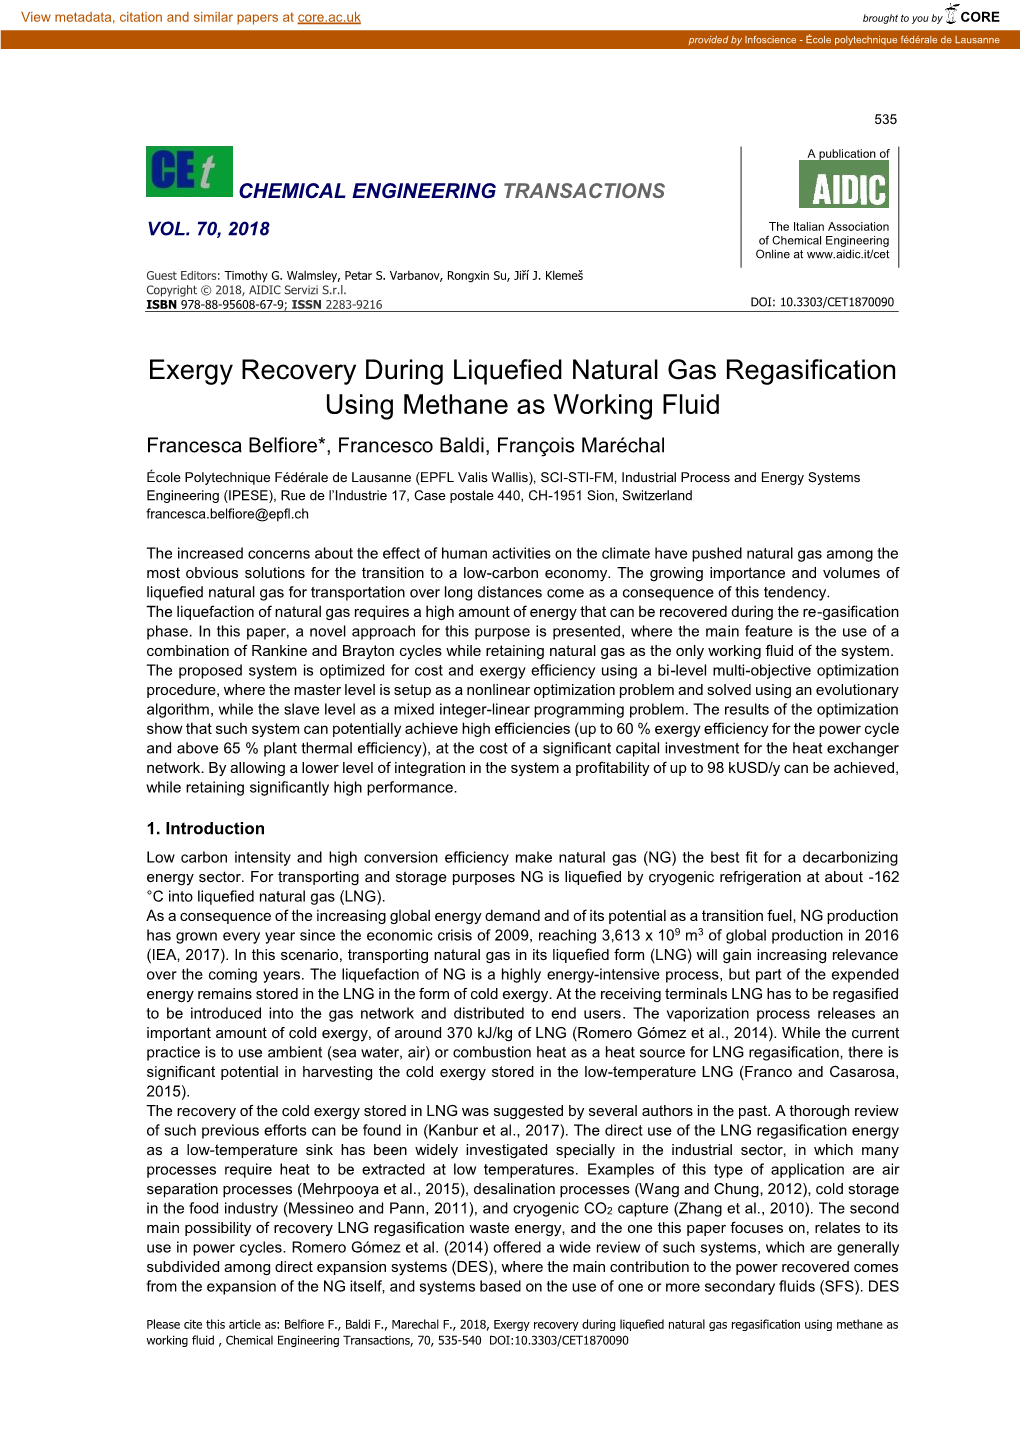 Exergy Recovery During Liquefied Natural Gas Regasification